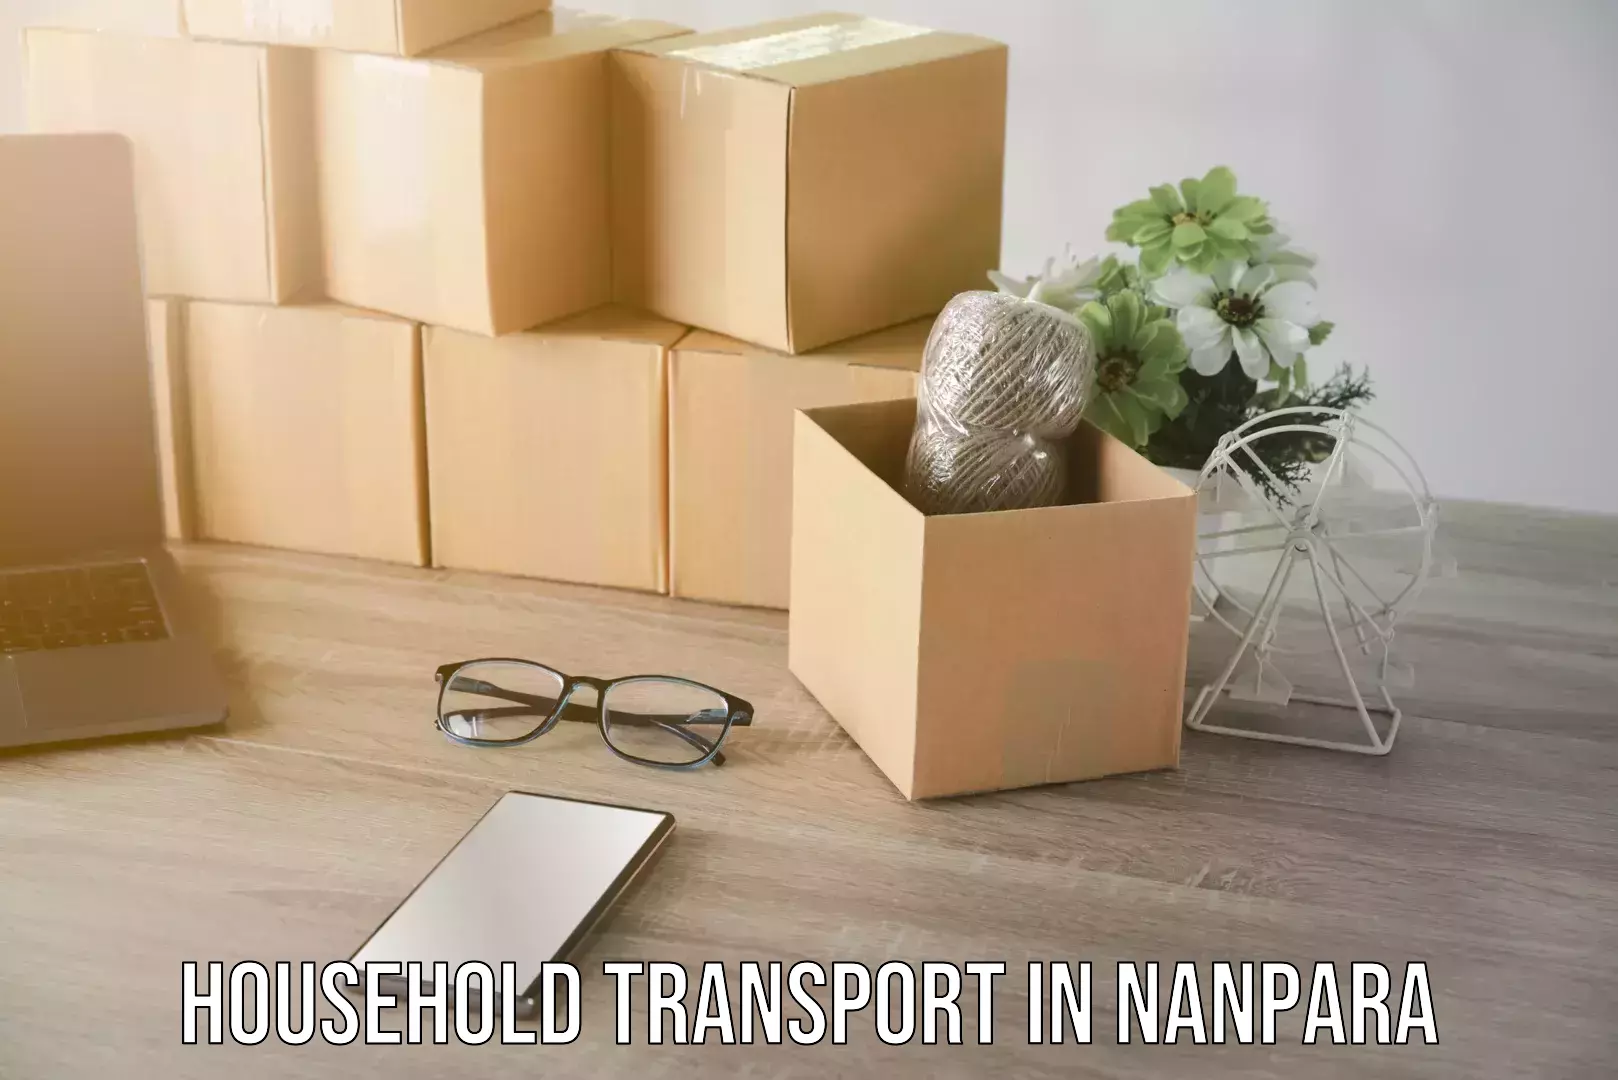 Trusted relocation experts in Nanpara